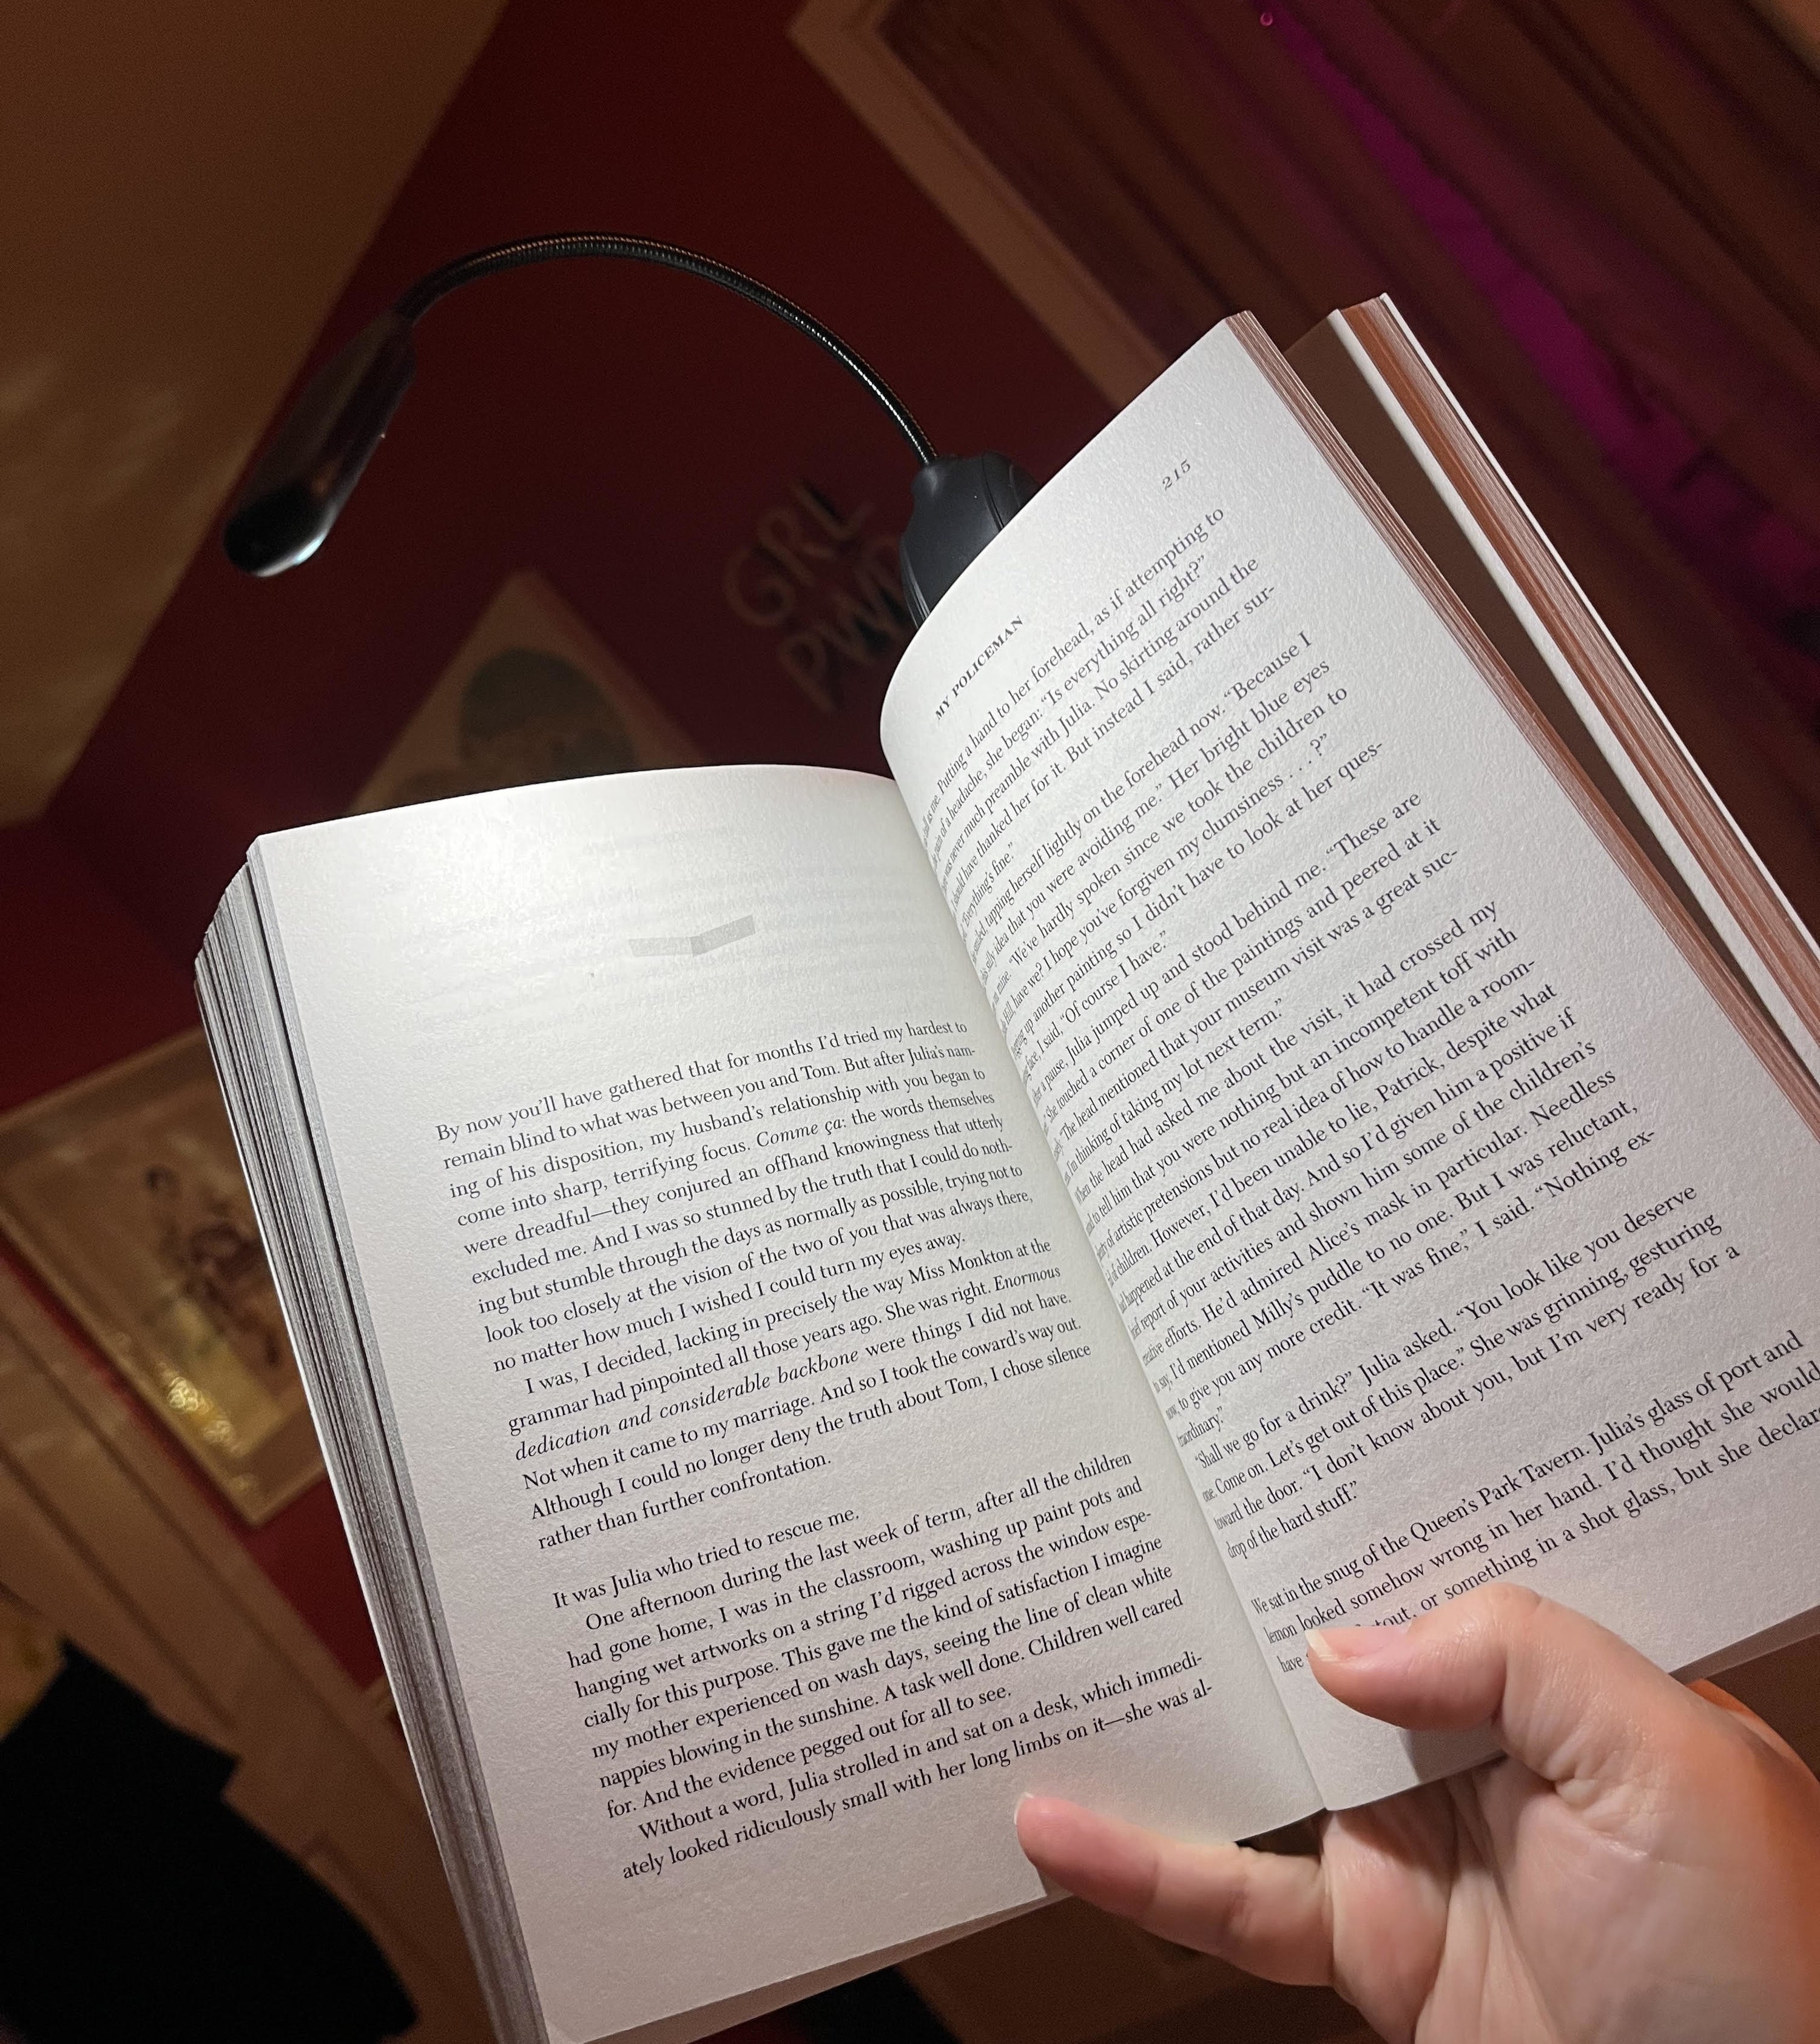 Bianca holding a book up with the light attached to the top as it illuminates the pages